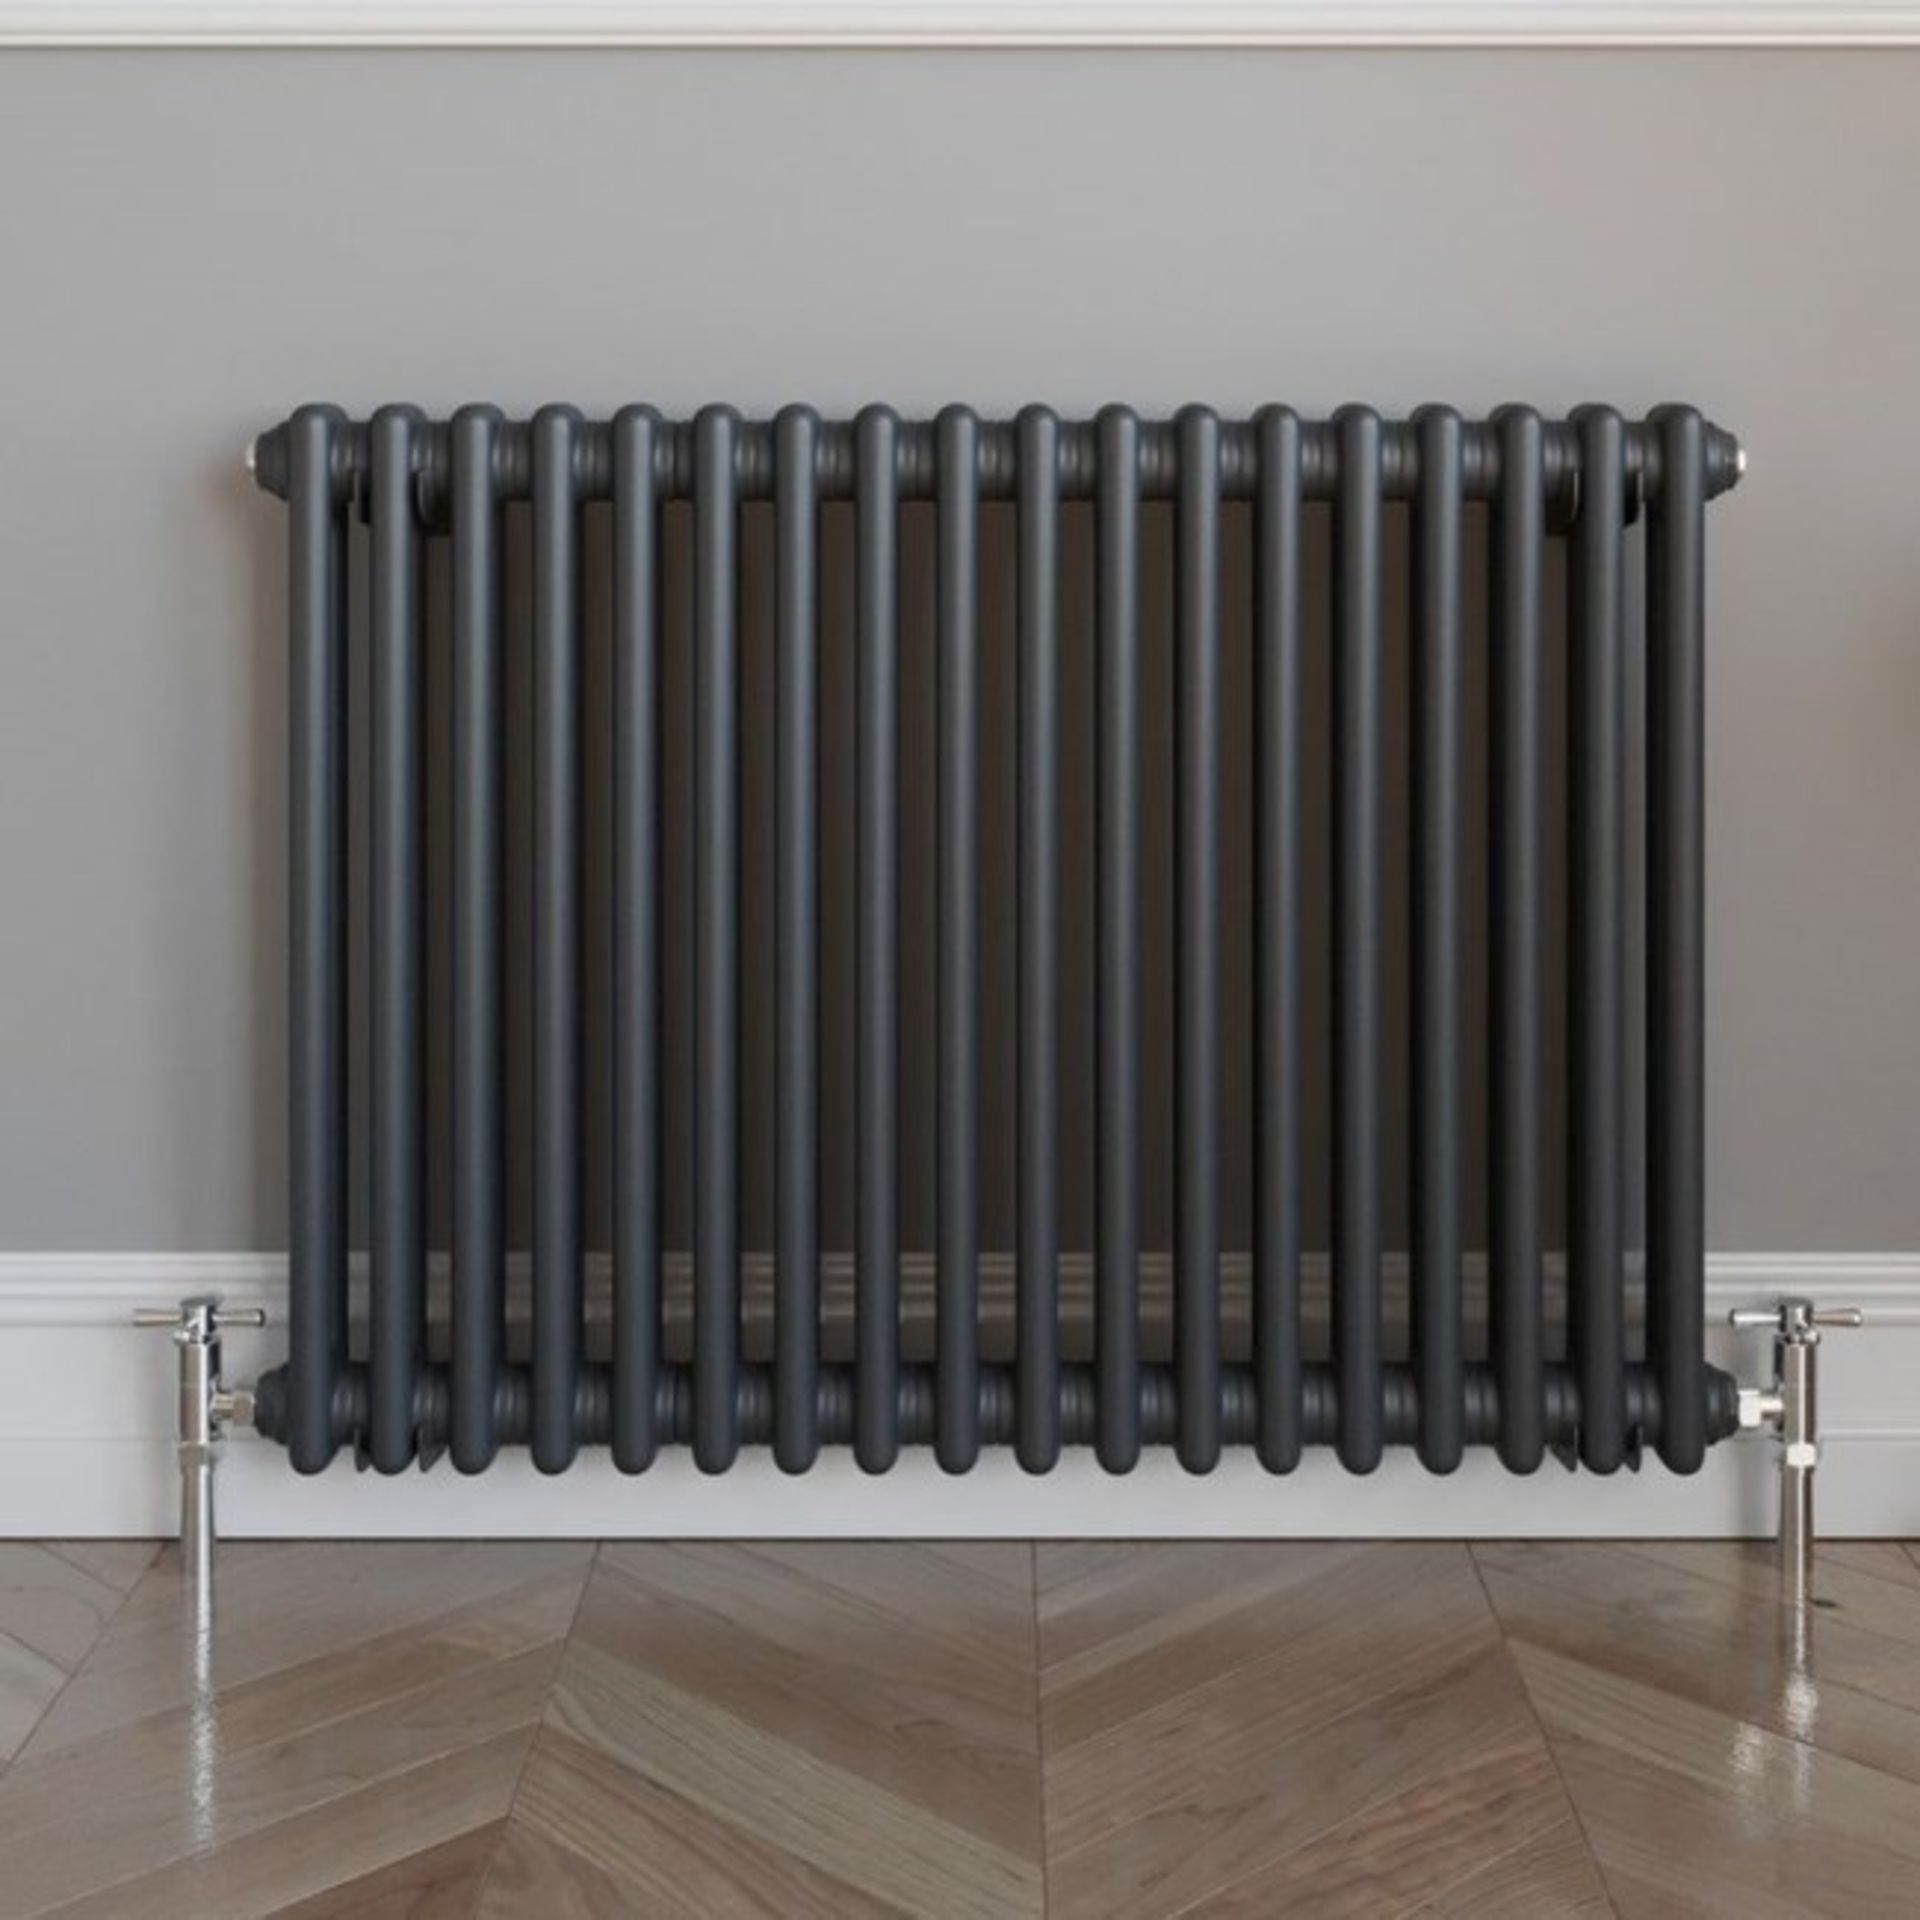 Brand New 600x828mm Anthracite Double Panel Horizontal Colosseum Traditional Radiator.RCA563.RRP £54 - Image 3 of 3